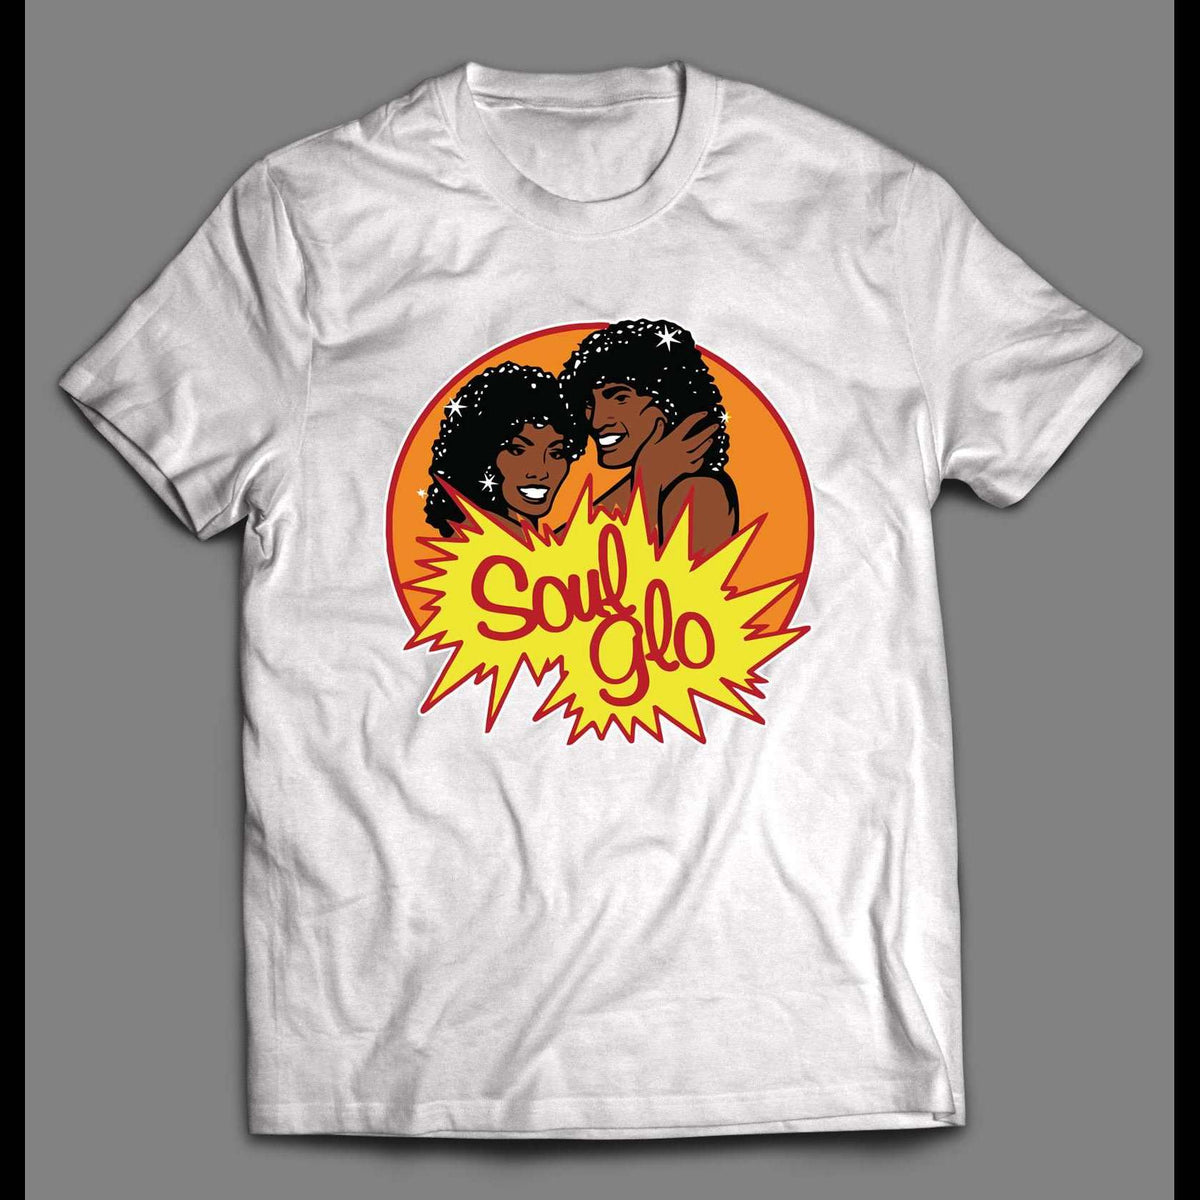 Coming To America Soul Glo Hair Gel Parody Shirt 80 S 90 S To Today Quality Artistic Graphic Shirts